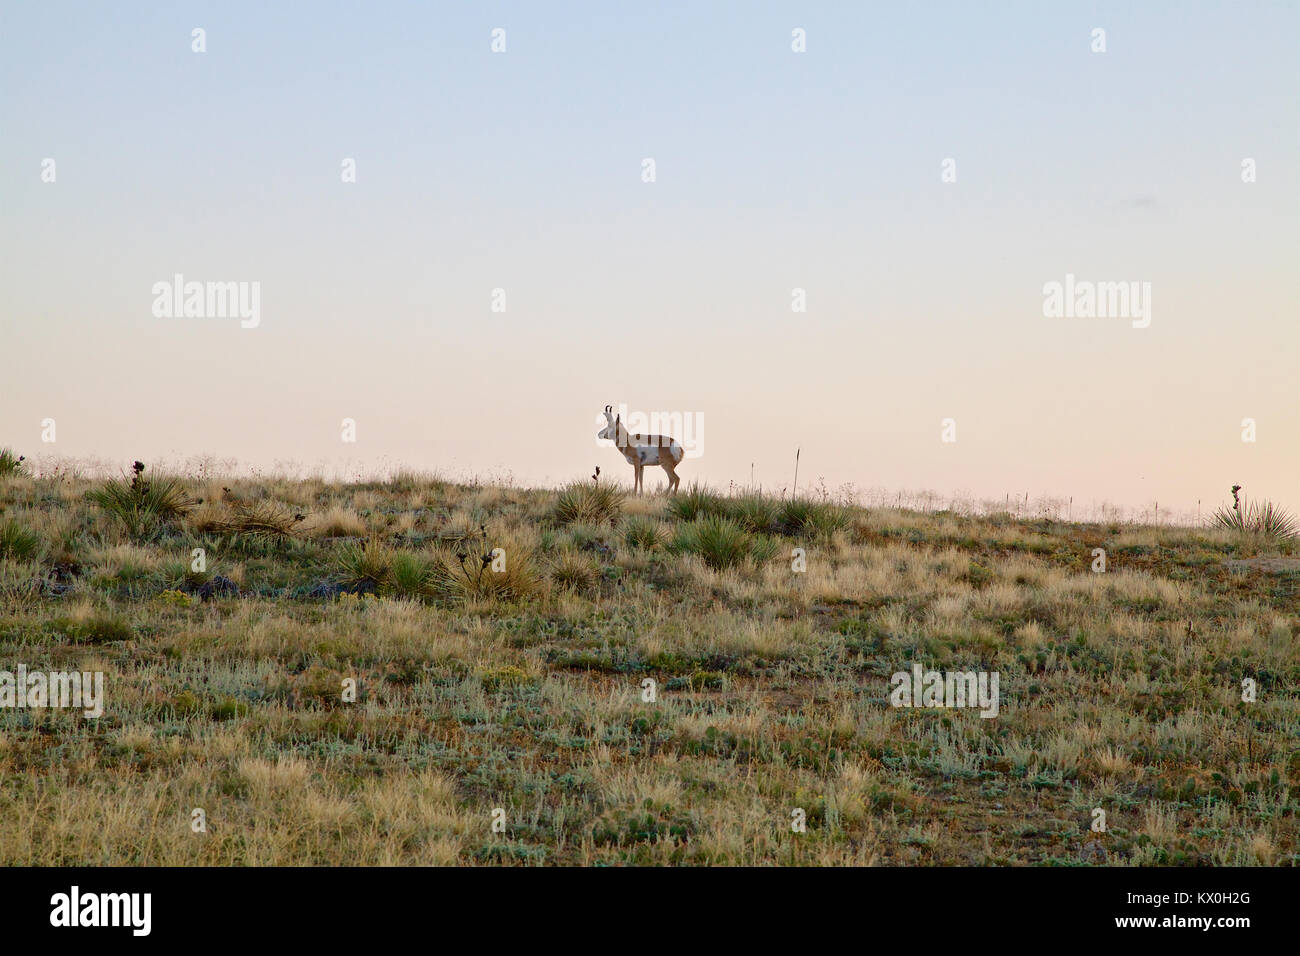 A lone pronghorn antelope stands on the crest of a hill at sunset. Stock Photo